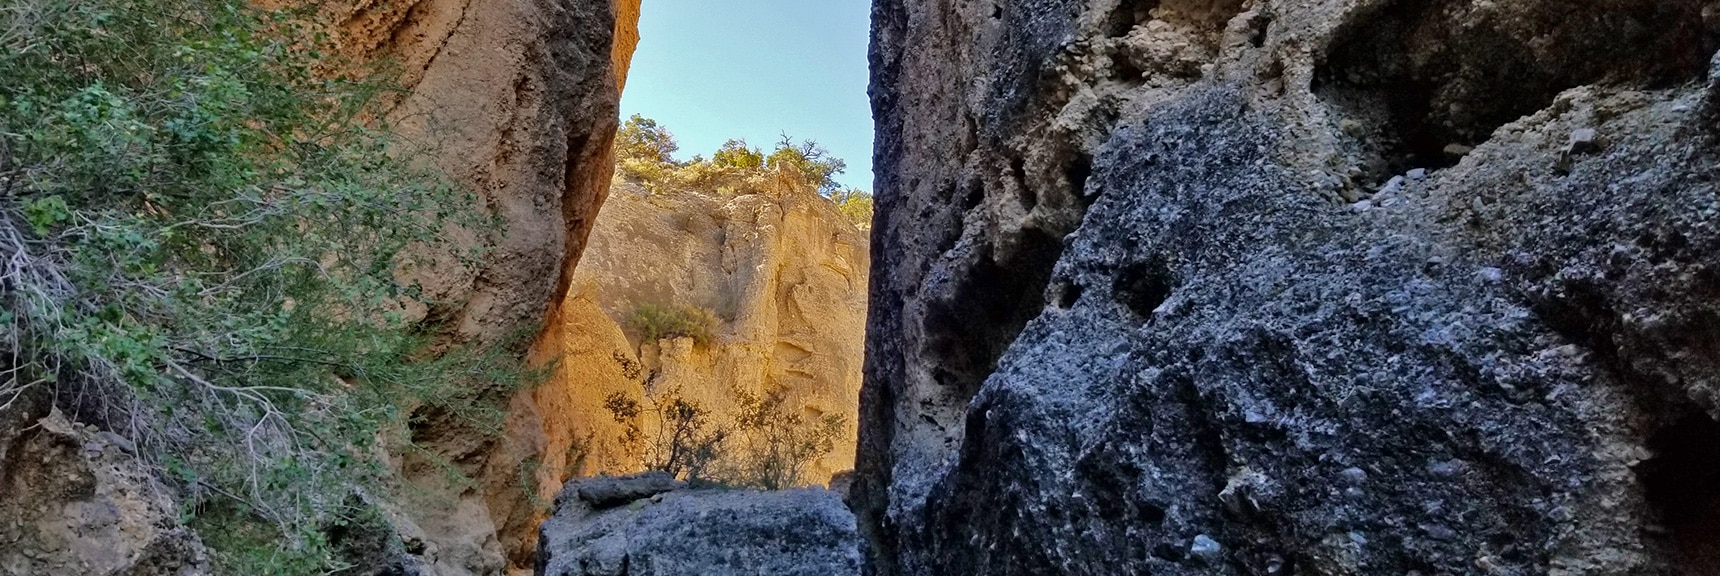 The Slot Canyon Portion is a Series of Narrow Areas Alternating with Open Areas | Harris Springs Canyon | Biking from Centennial Hills | Spring Mountains, Nevada